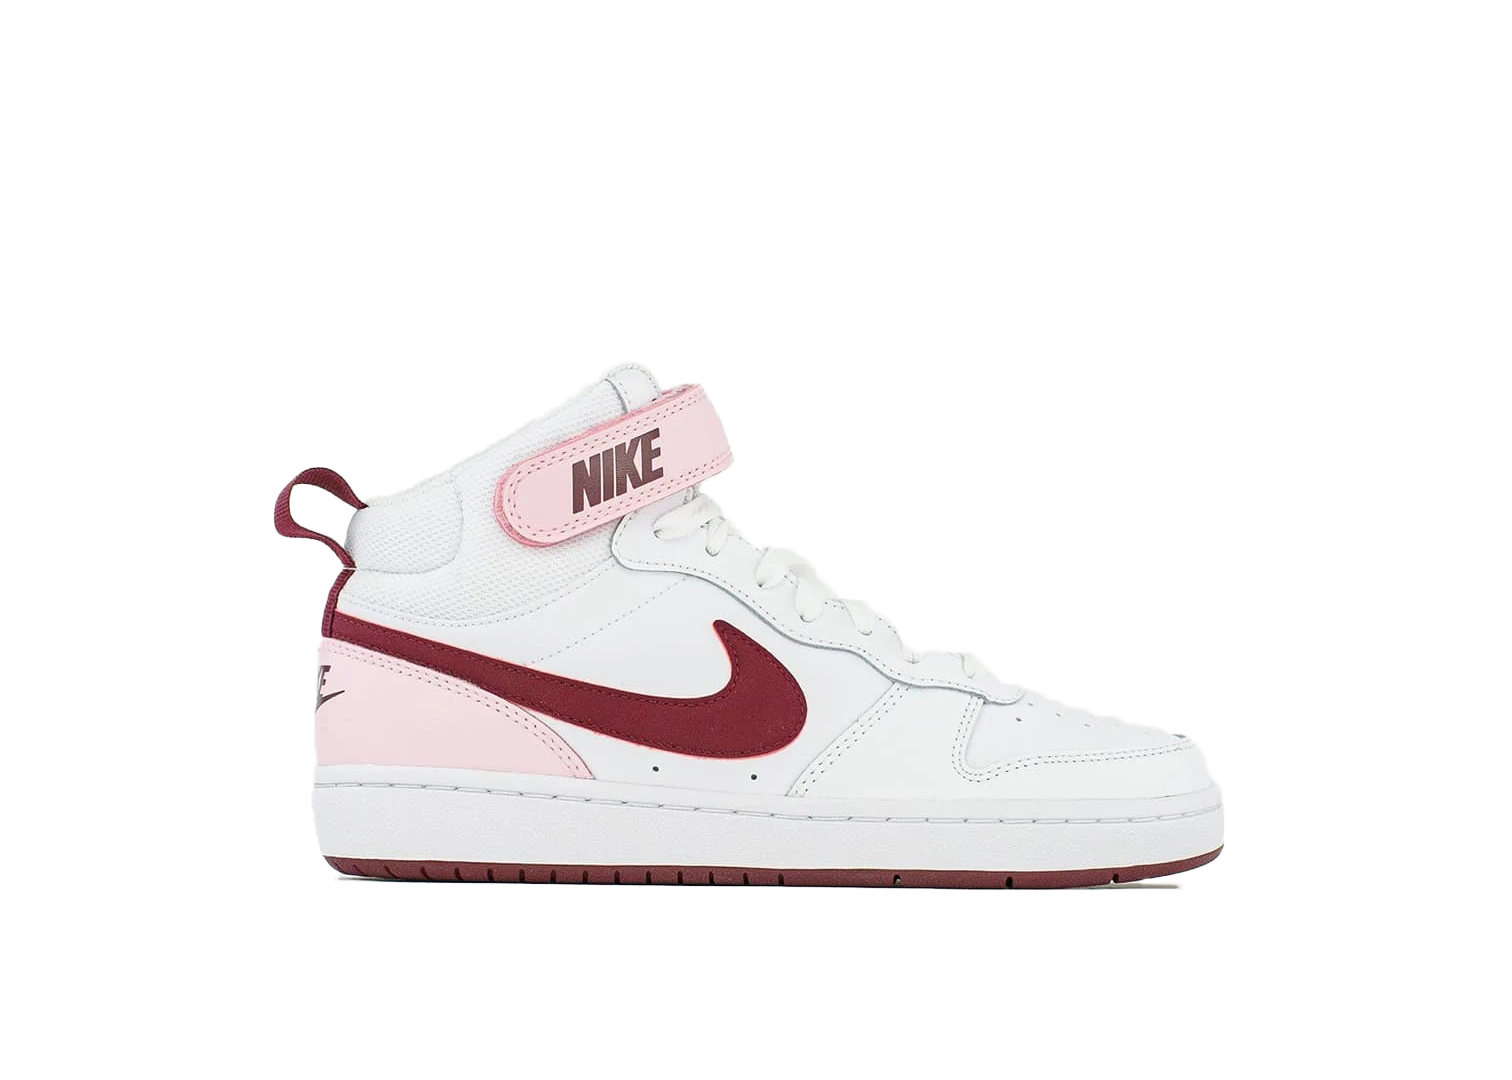 Nike Court Royale 2 Mid White Rush Pink (Women's) - CT1725-104 - US